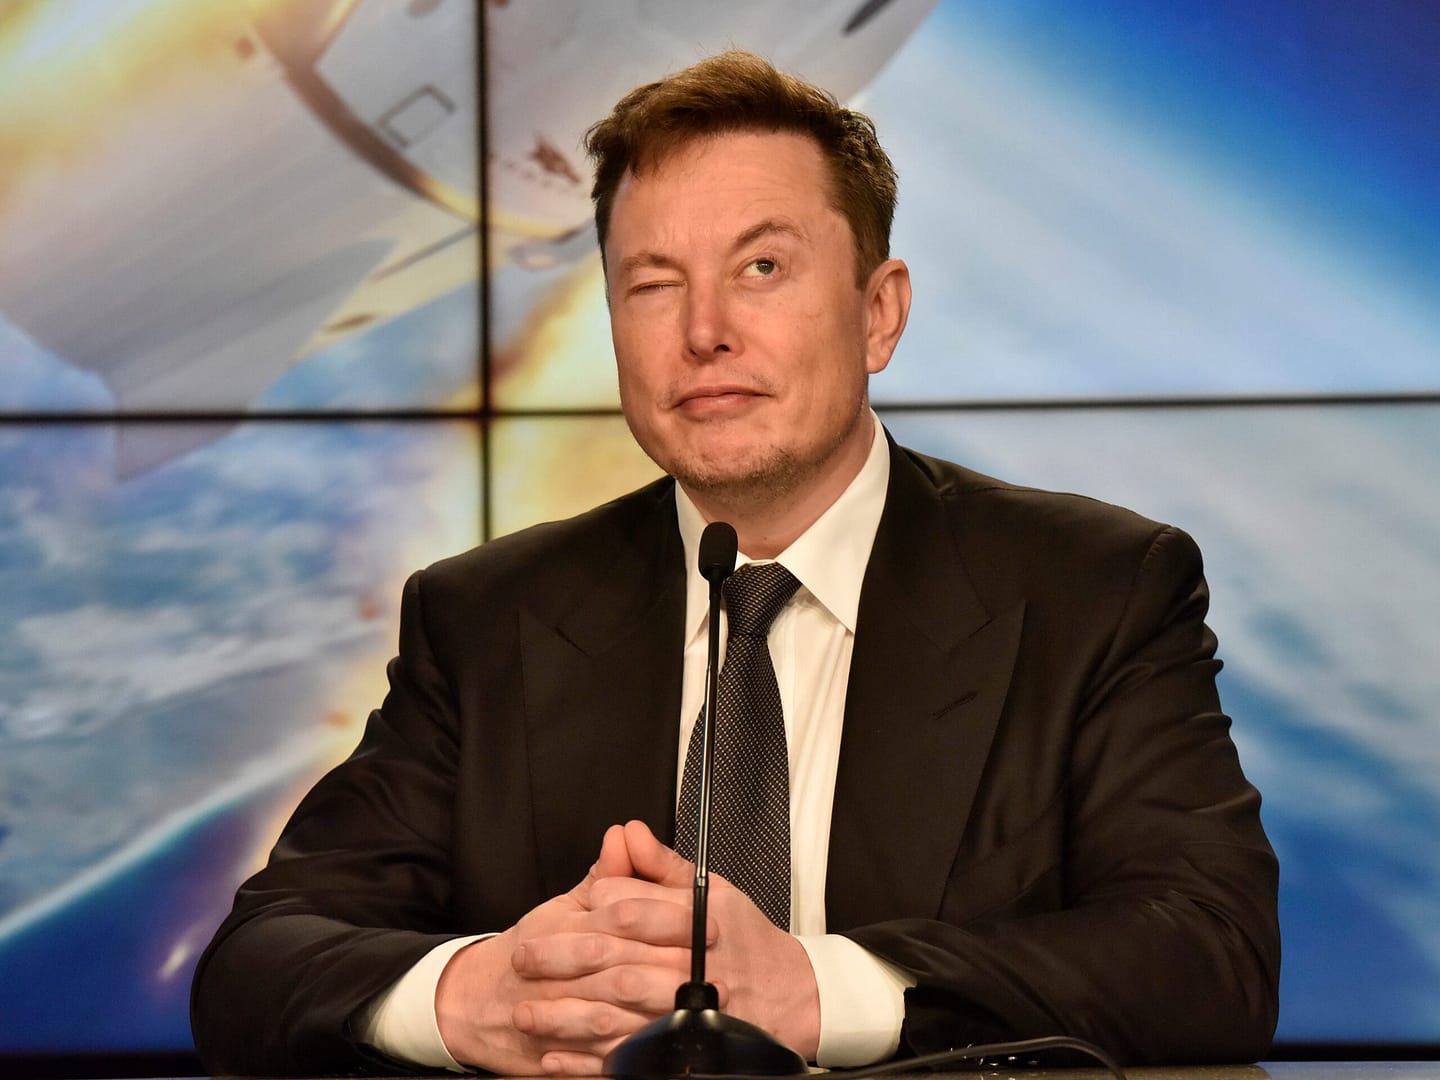 elon-musk-is-‘blackmailing’-tesla-investors-by-threatening-to-build-new-projects-outside-of-the-ev-company,-long-time-tesla-bull-says